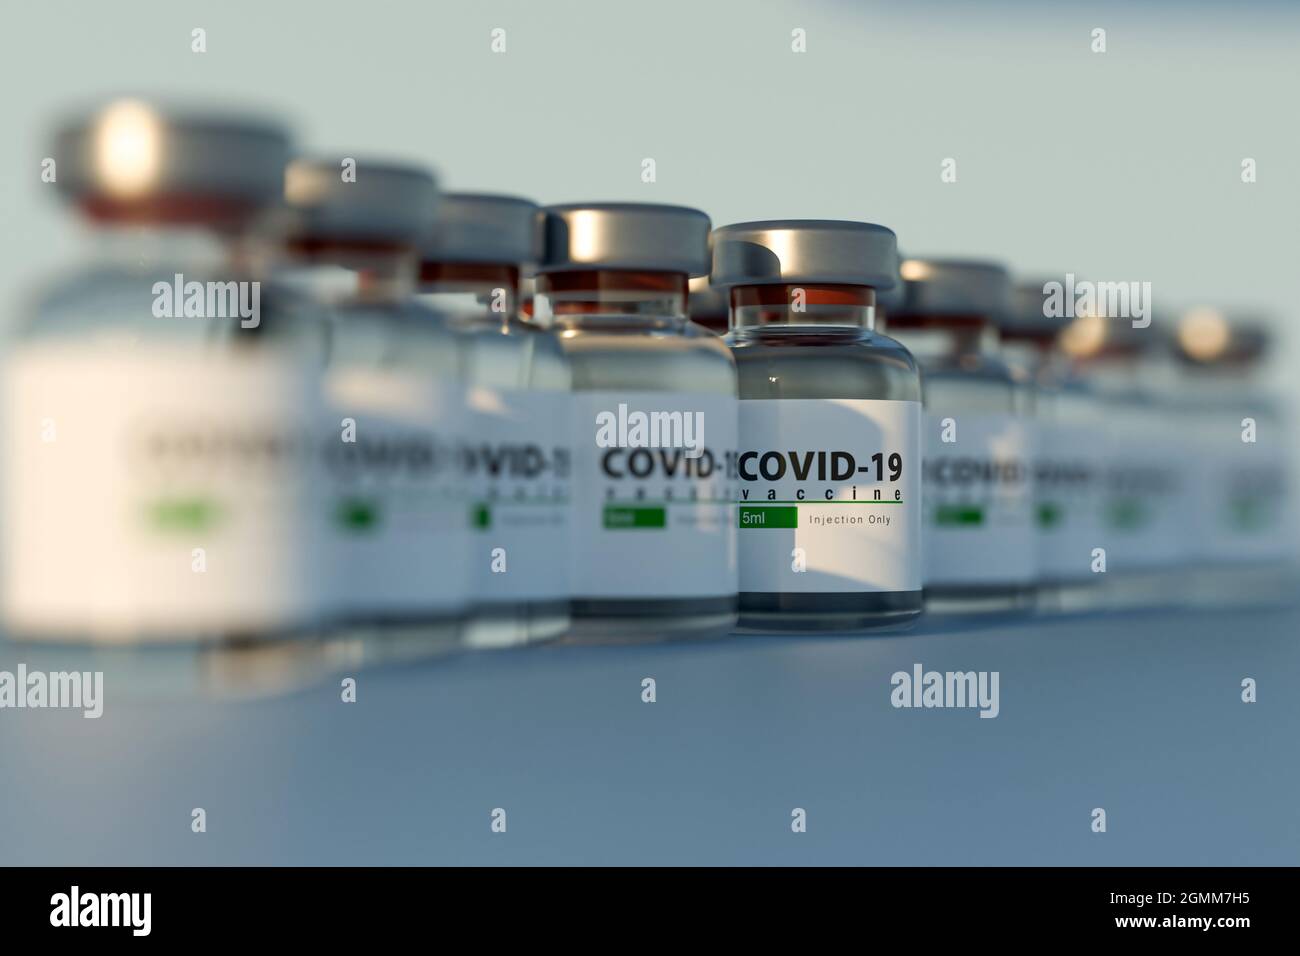 SARS - CoV2 Vaccine concept. A medical needle entering into a glass vial of COVID-19 Vaccine. Medical research 3D illustration. Stock Photo